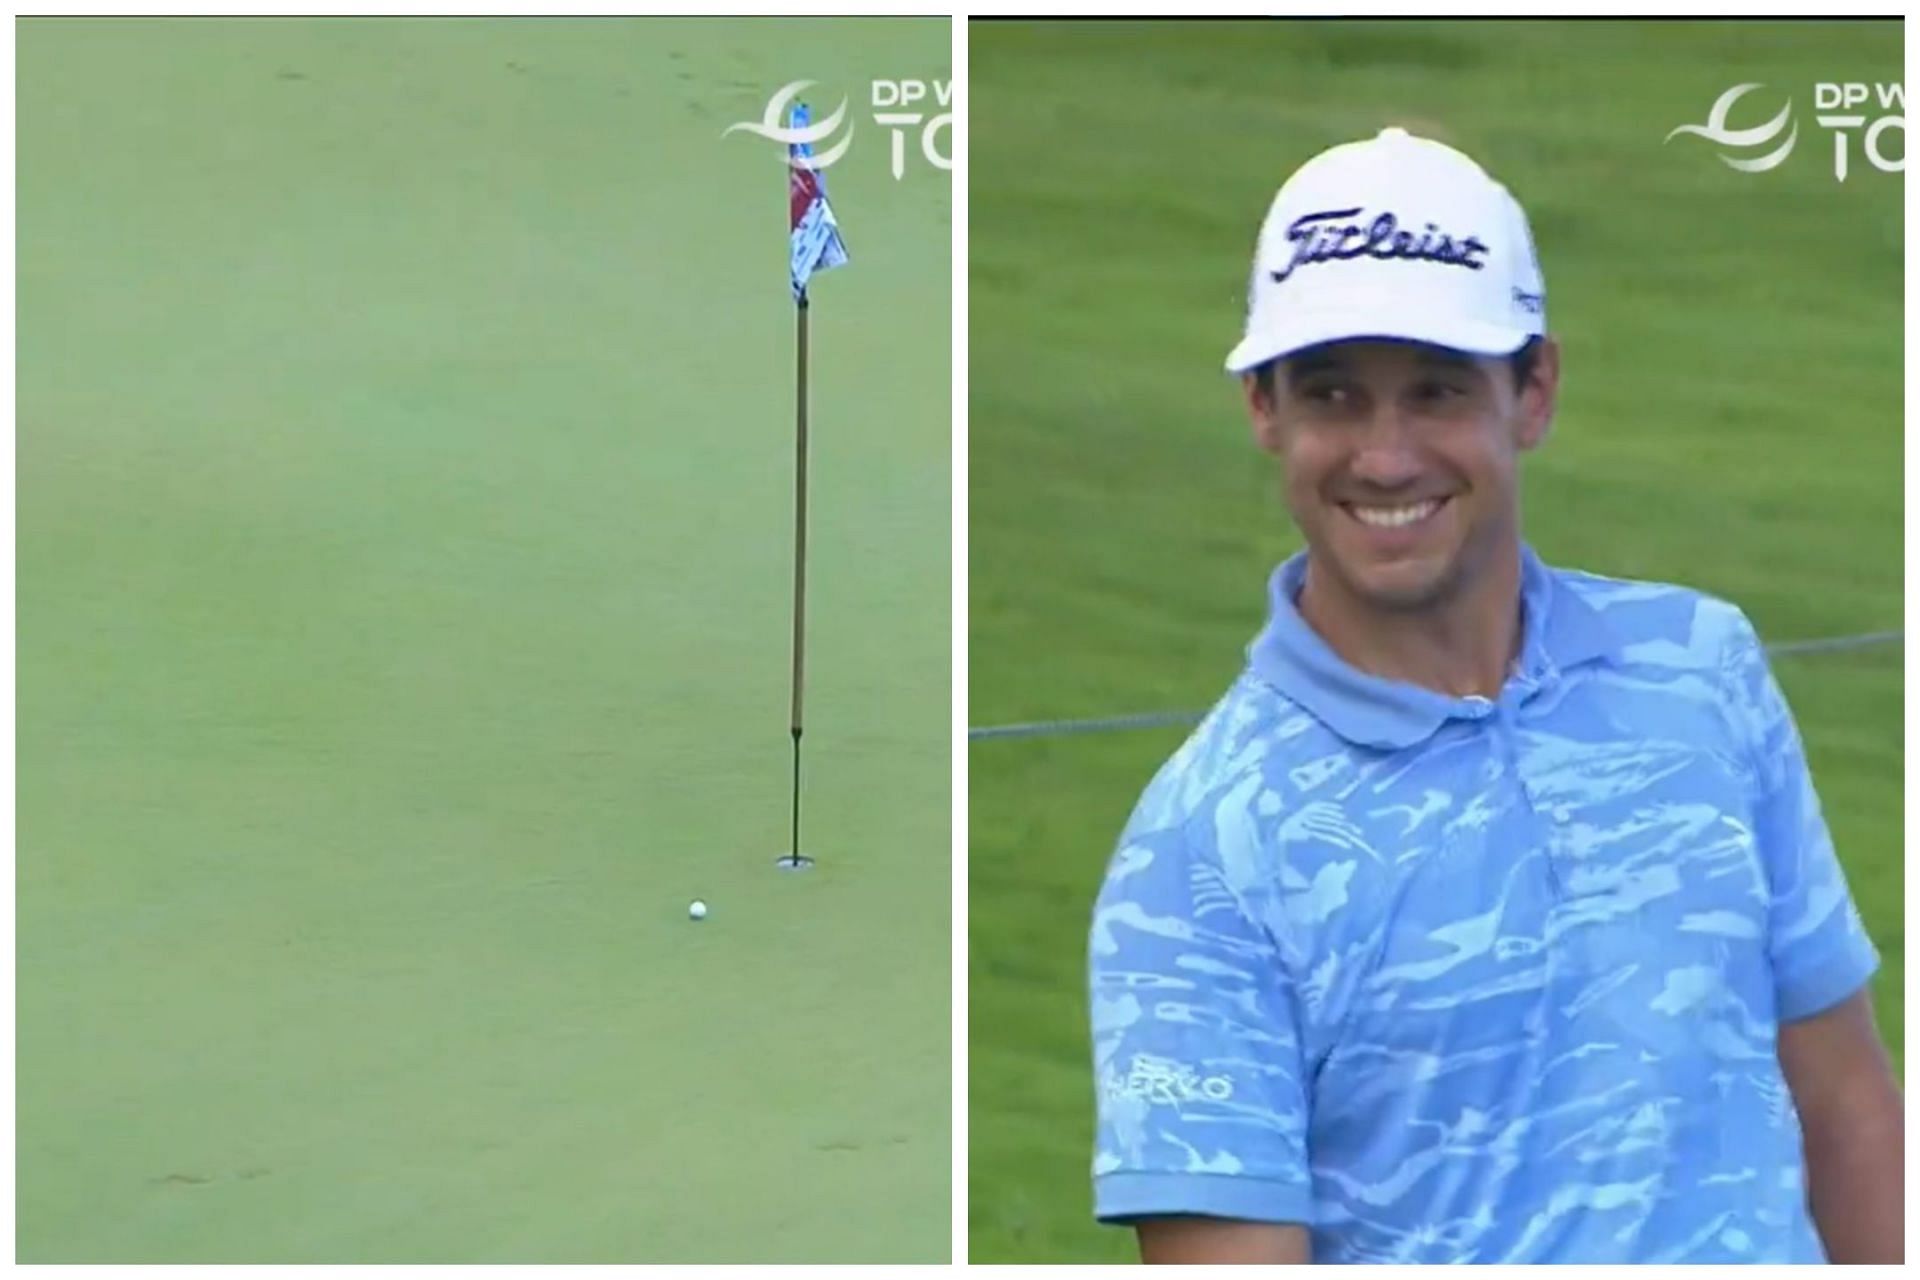 Matteo Manassero makes an incredible birdie in the opening round of the Mauritius Open